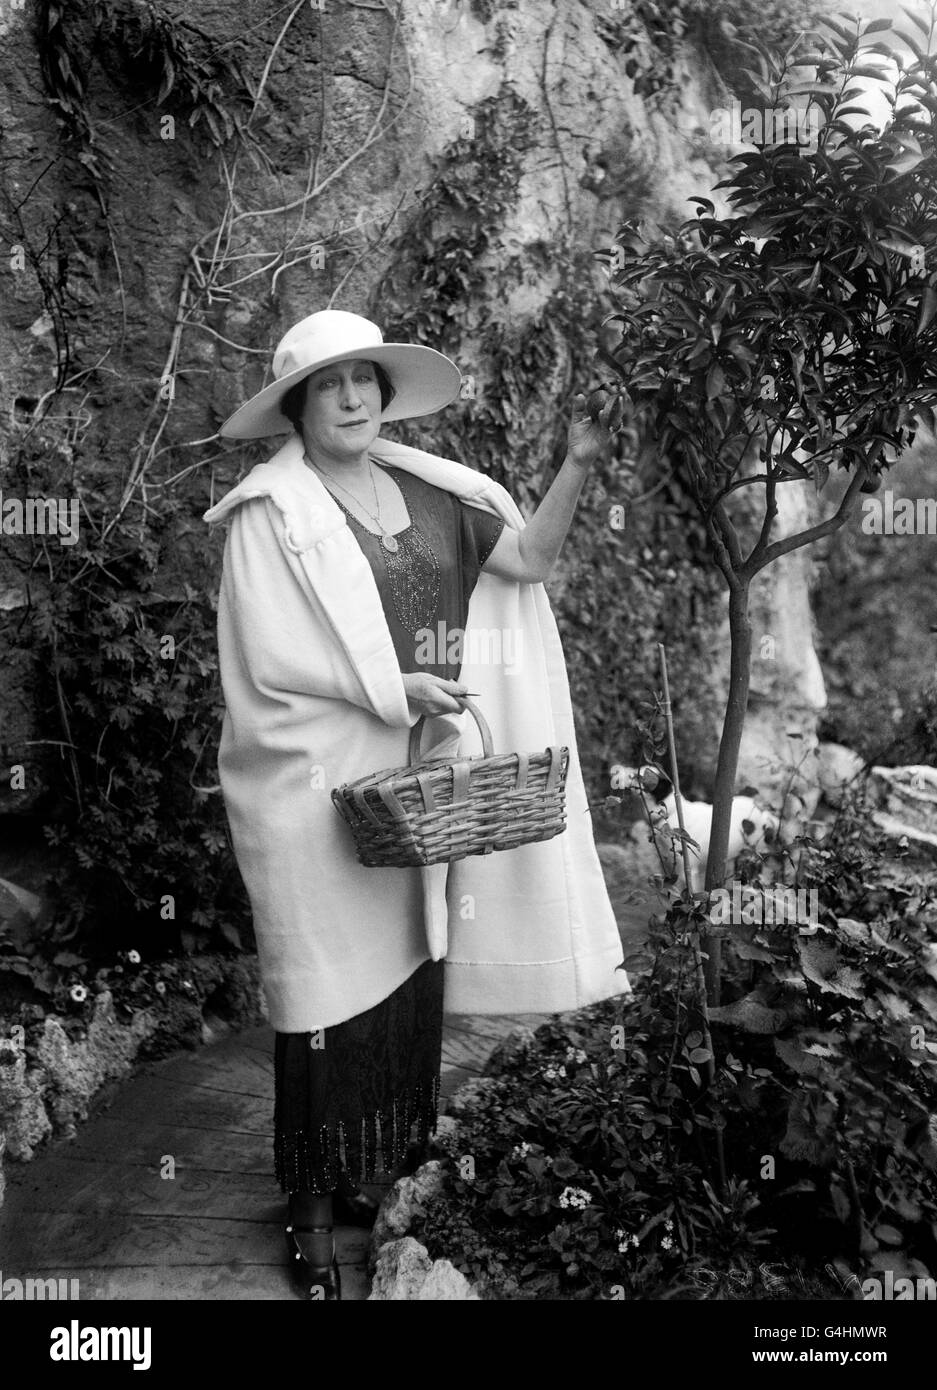 Former actress Lillie Langtry picking fruit from a tree in the garden of her home in Monaco in 1922. She achieved notoriety by being the mistress of King Edward VII. She died in Monaco in 1929. She was known as 'The Jersey Lily' having been born on the island of Jersey in 1853. Stock Photo